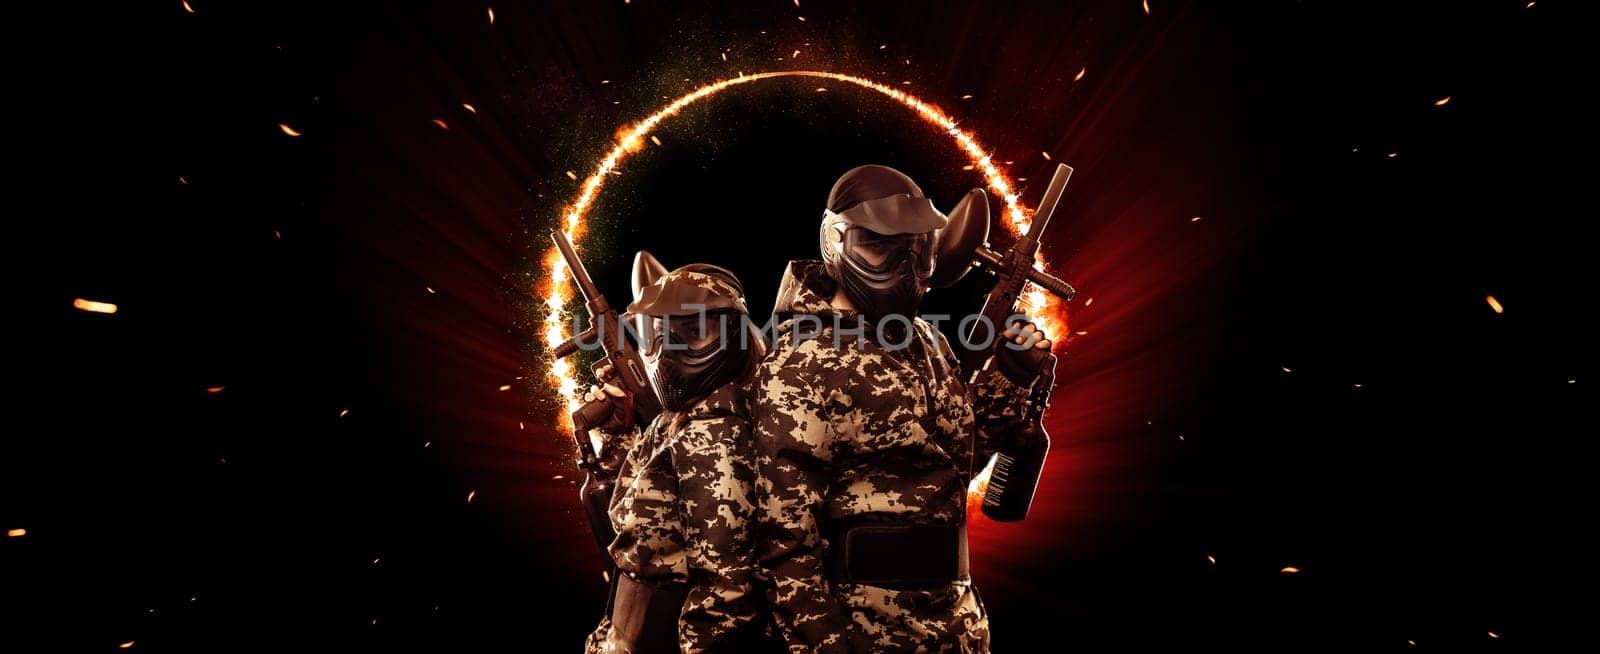 Paintball team. Family plays lasertag in the paint ball park. Advertisement design for laser tag location